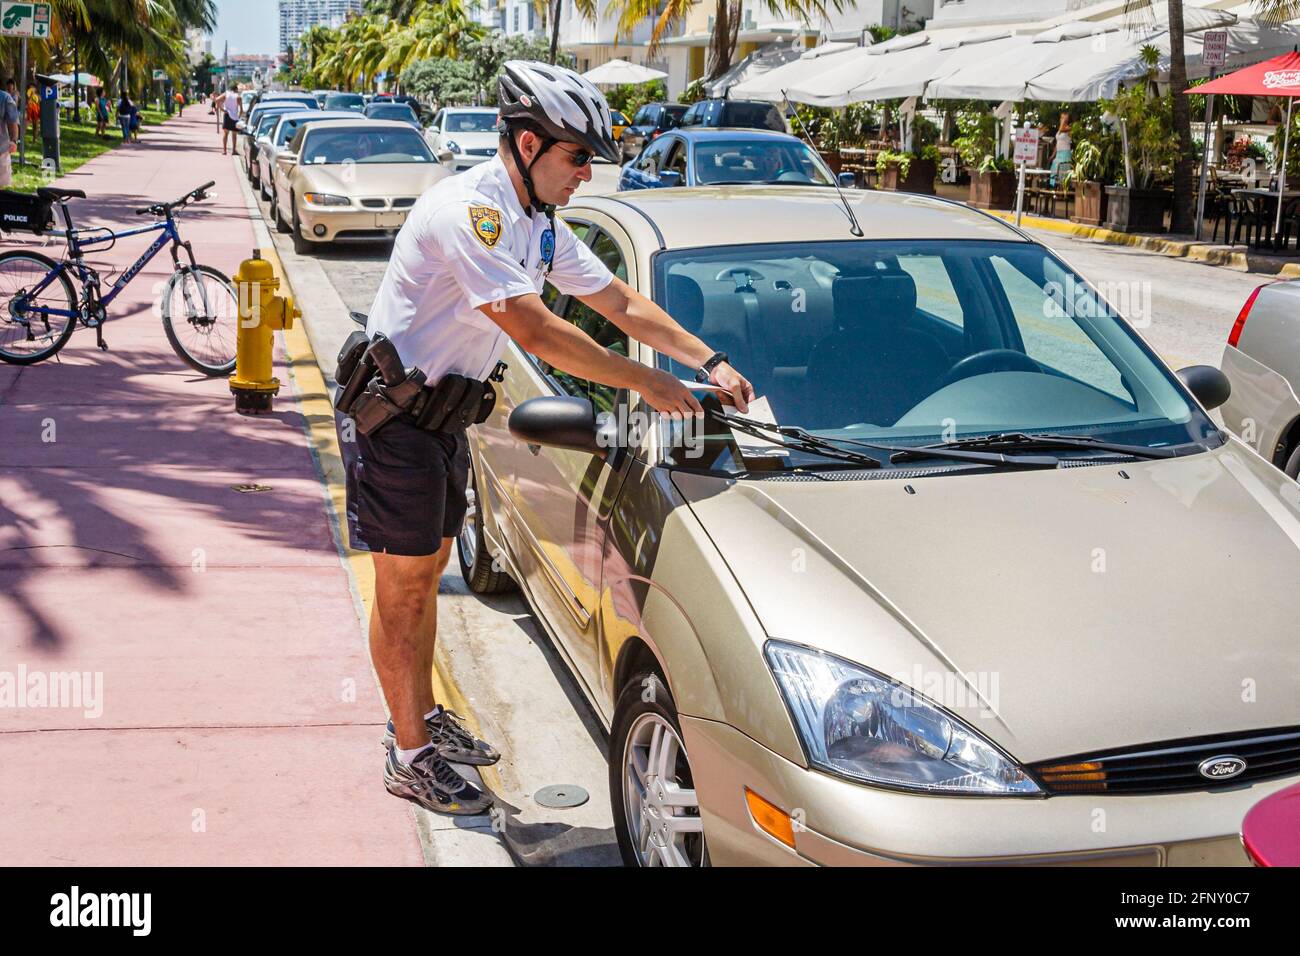 Miami Beach Florida,Ocean Drive,policeman police giving leaving placing parking ticket car window windshield, Stock Photo